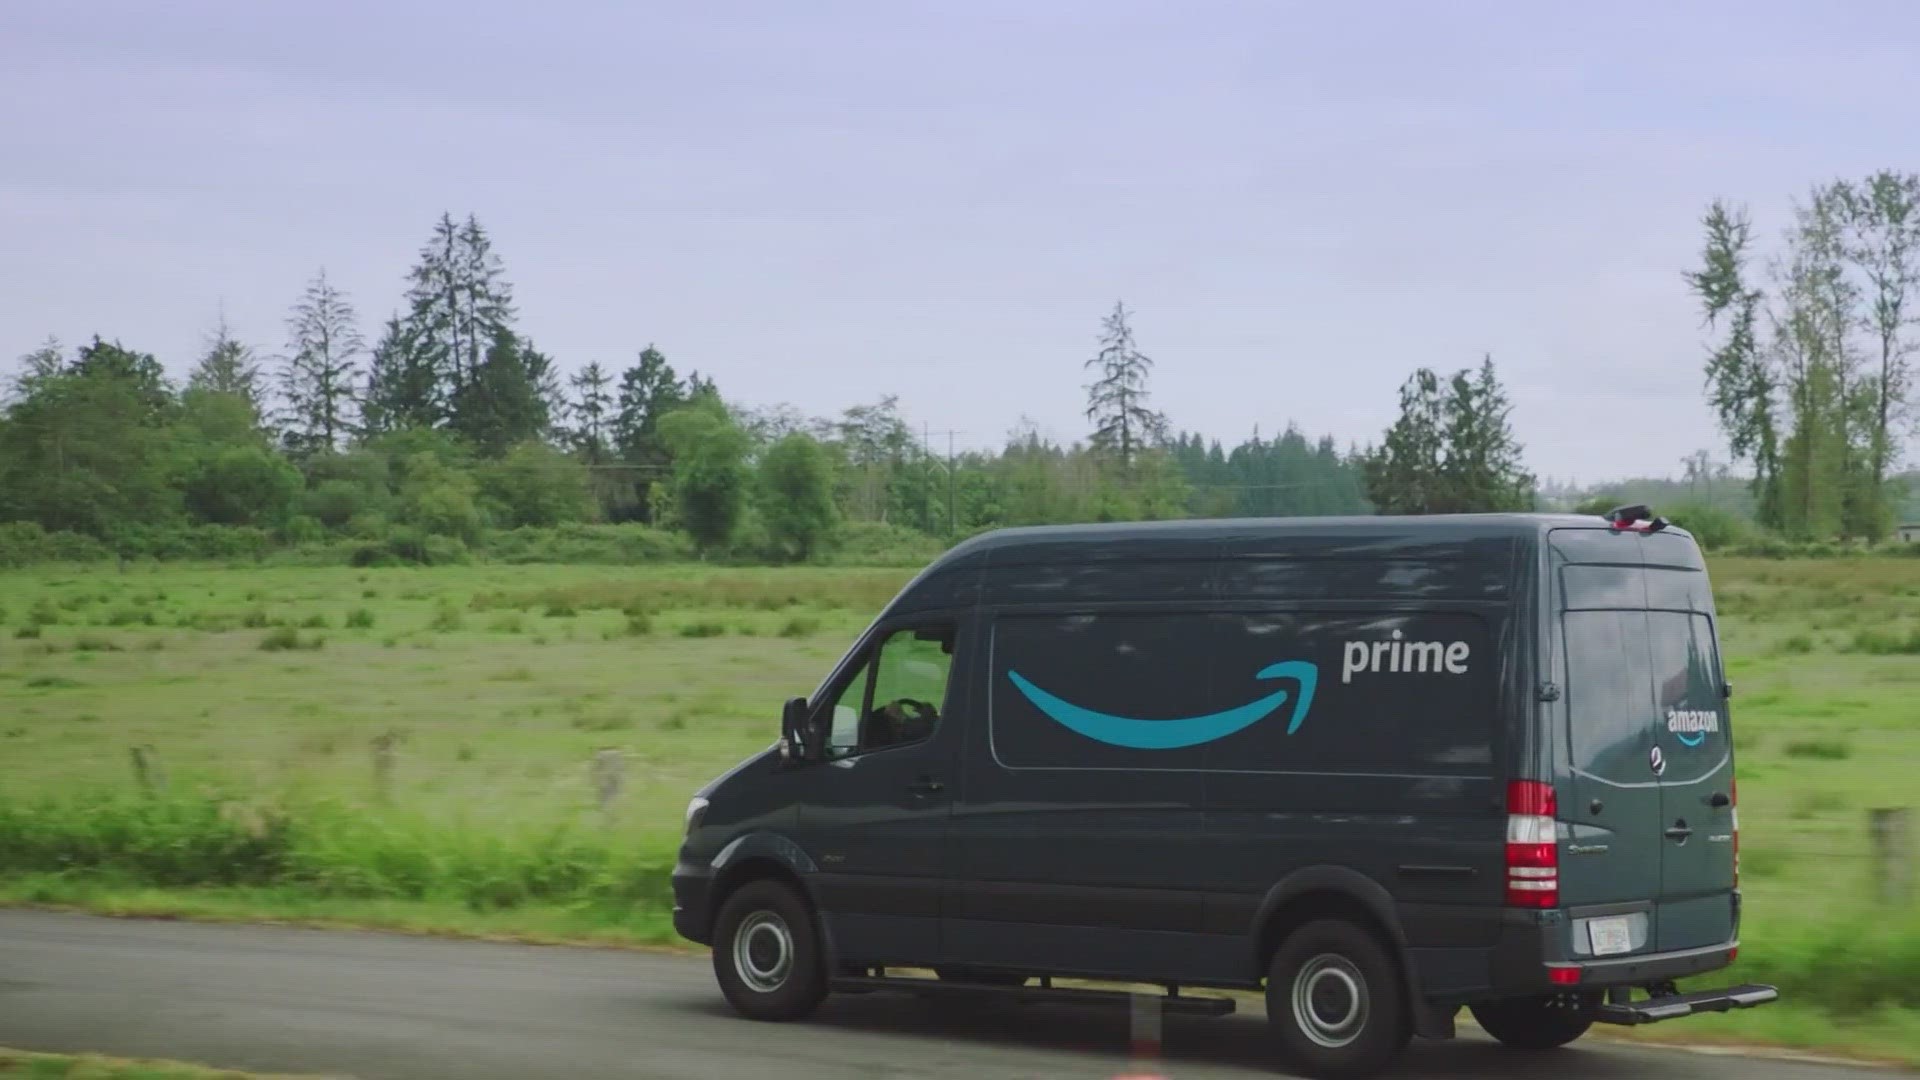 Amazon said it's not planning on creating a new fee for deliveries in Seattle after a controversial ordinance giving drivers a minimum wage went into effect Saturday